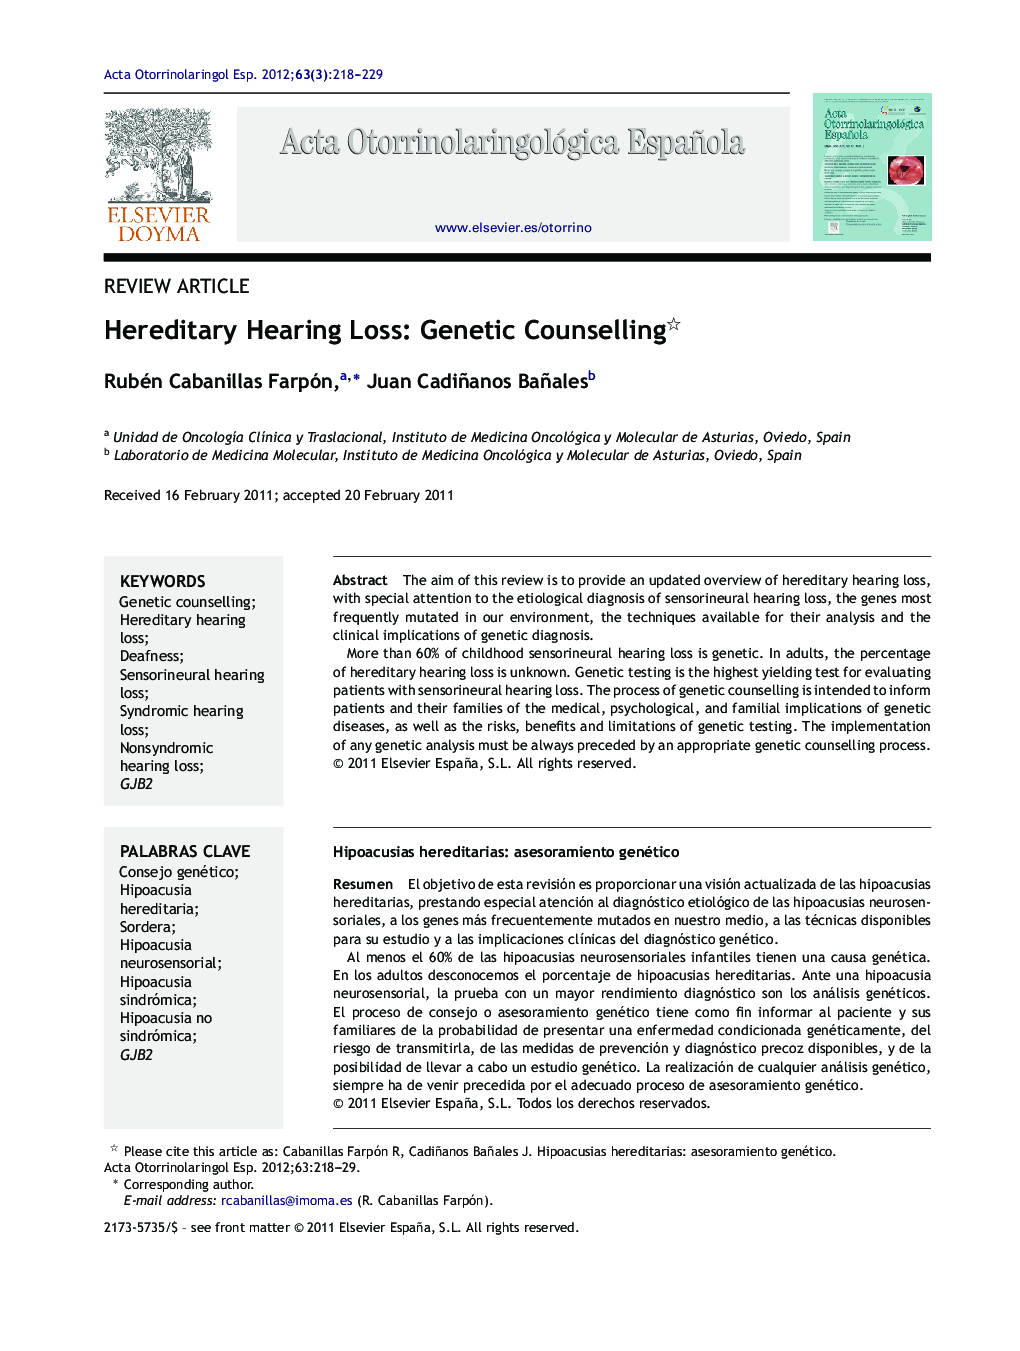 Hereditary Hearing Loss: Genetic Counselling 